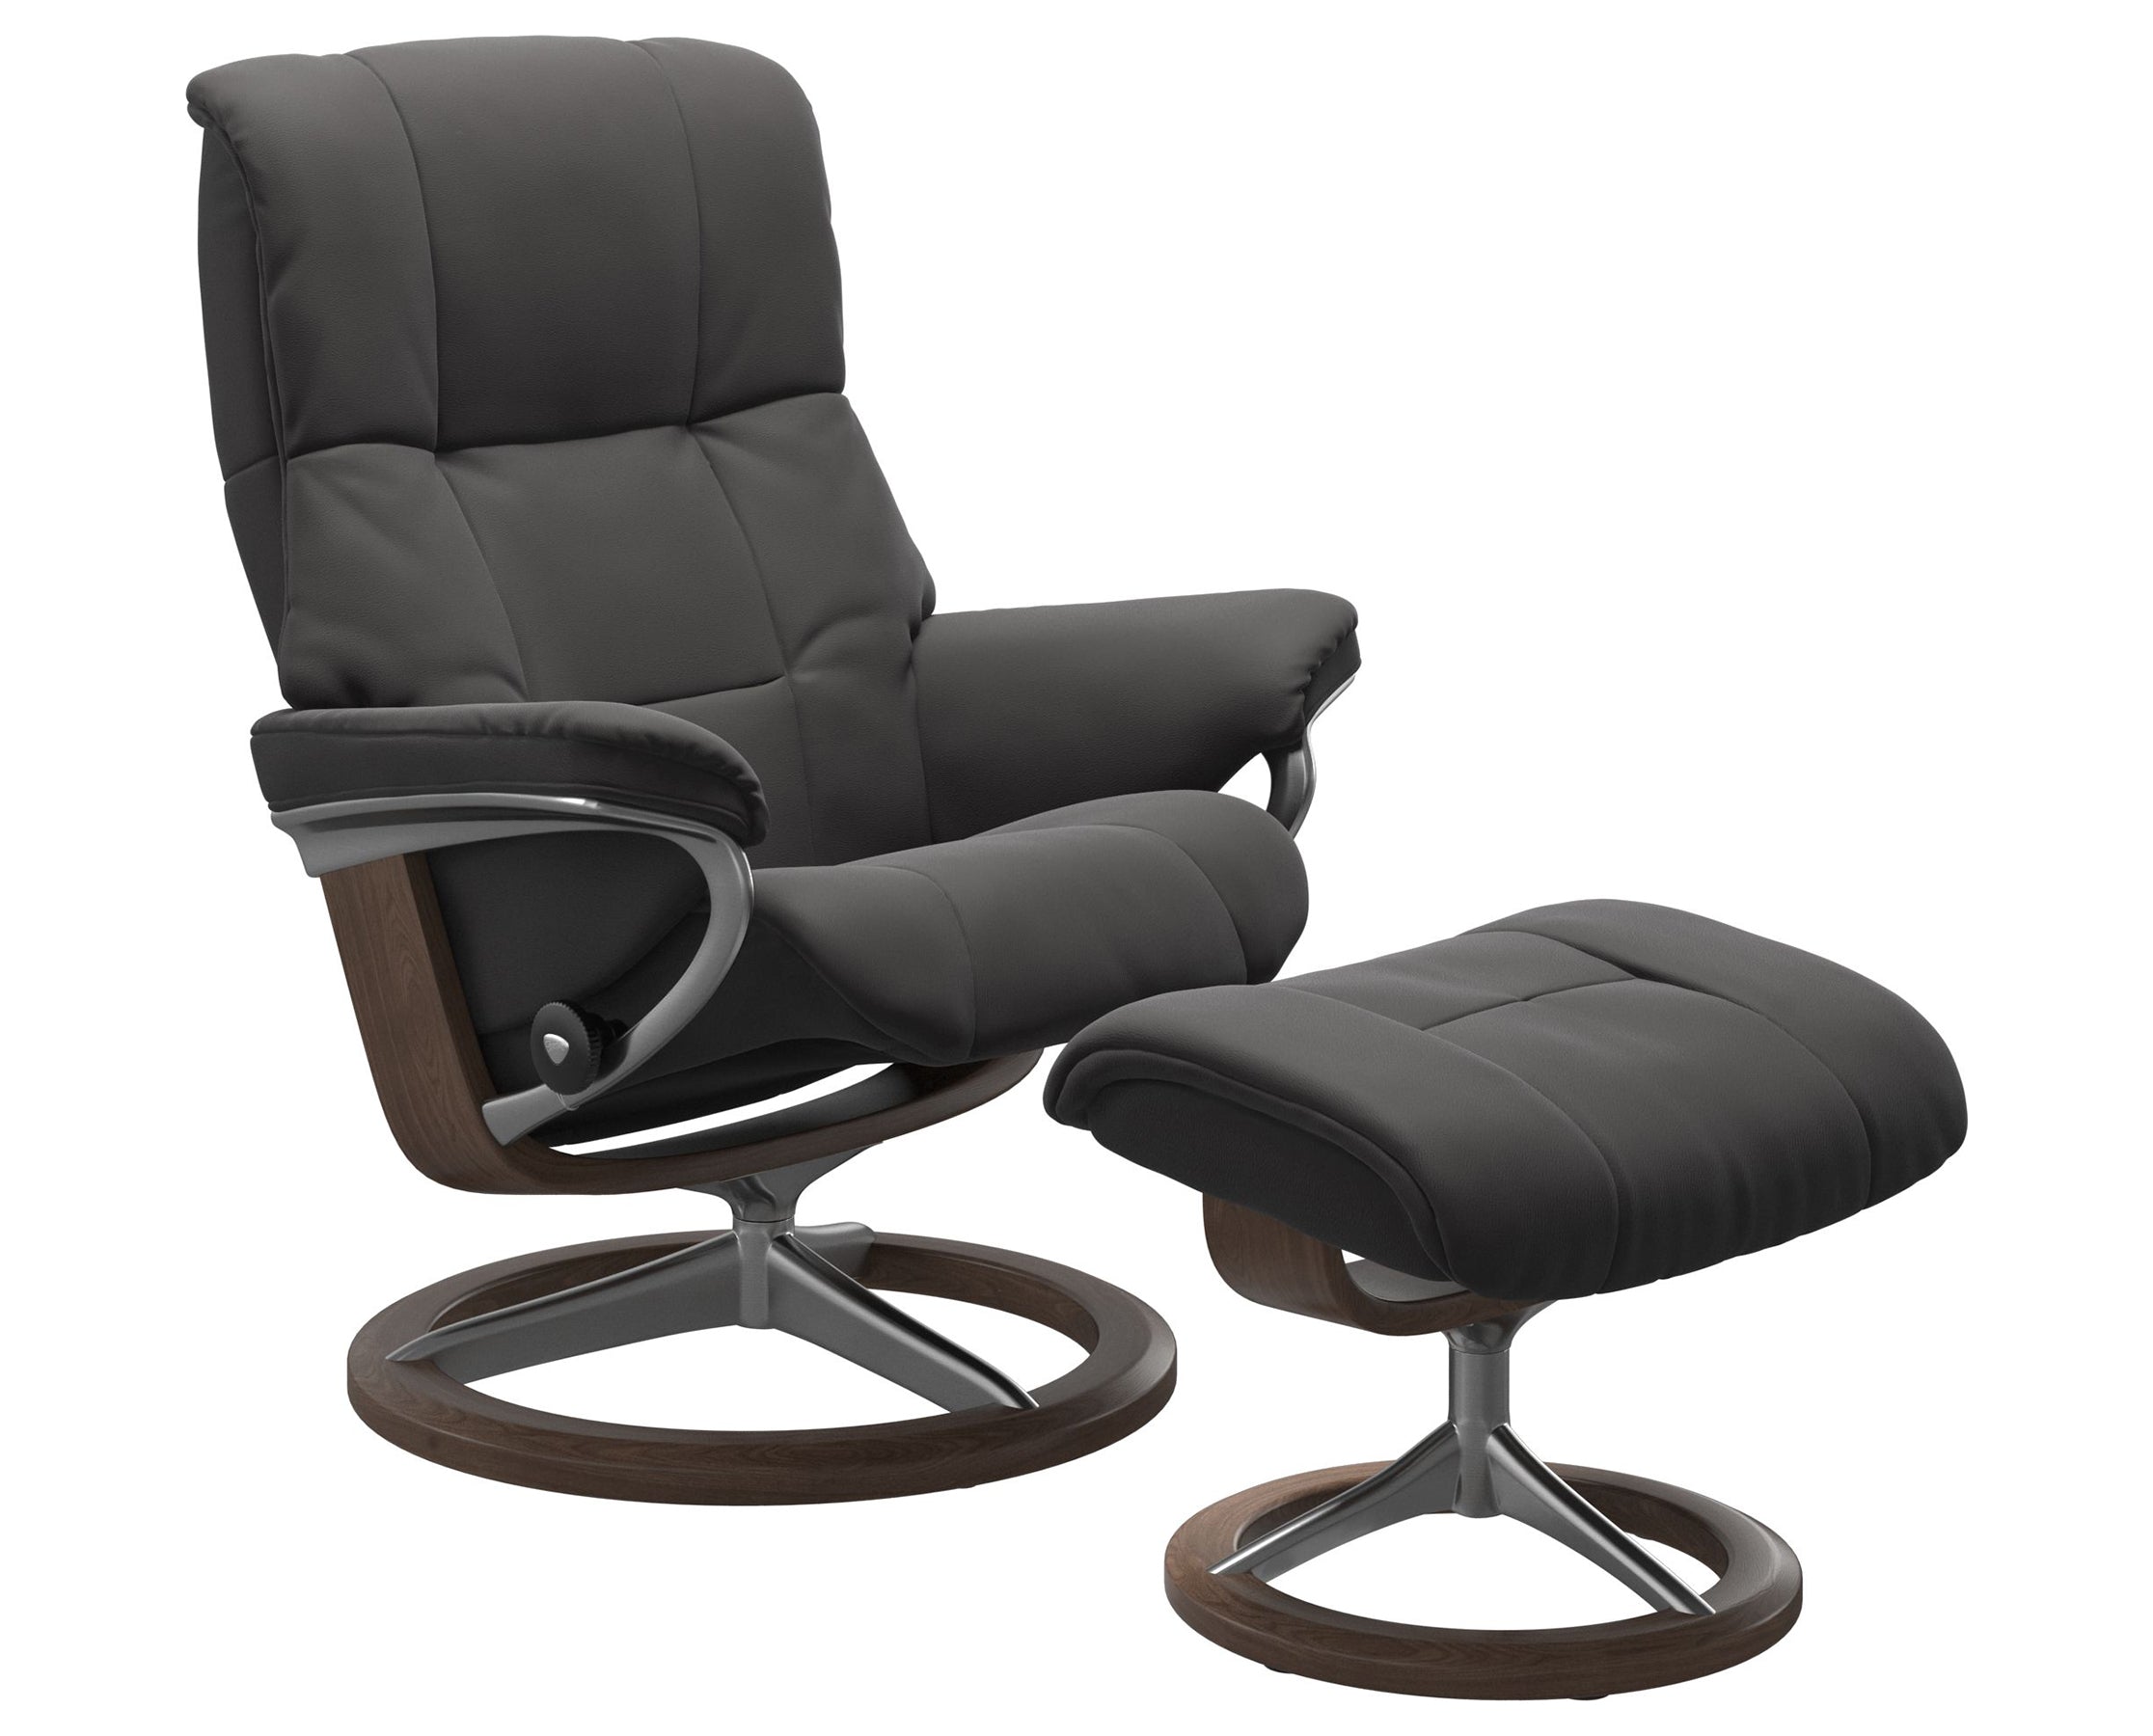 Paloma Leather Rock S/M/L and Walnut Base | Stressless Mayfair Signature Recliner | Valley Ridge Furniture